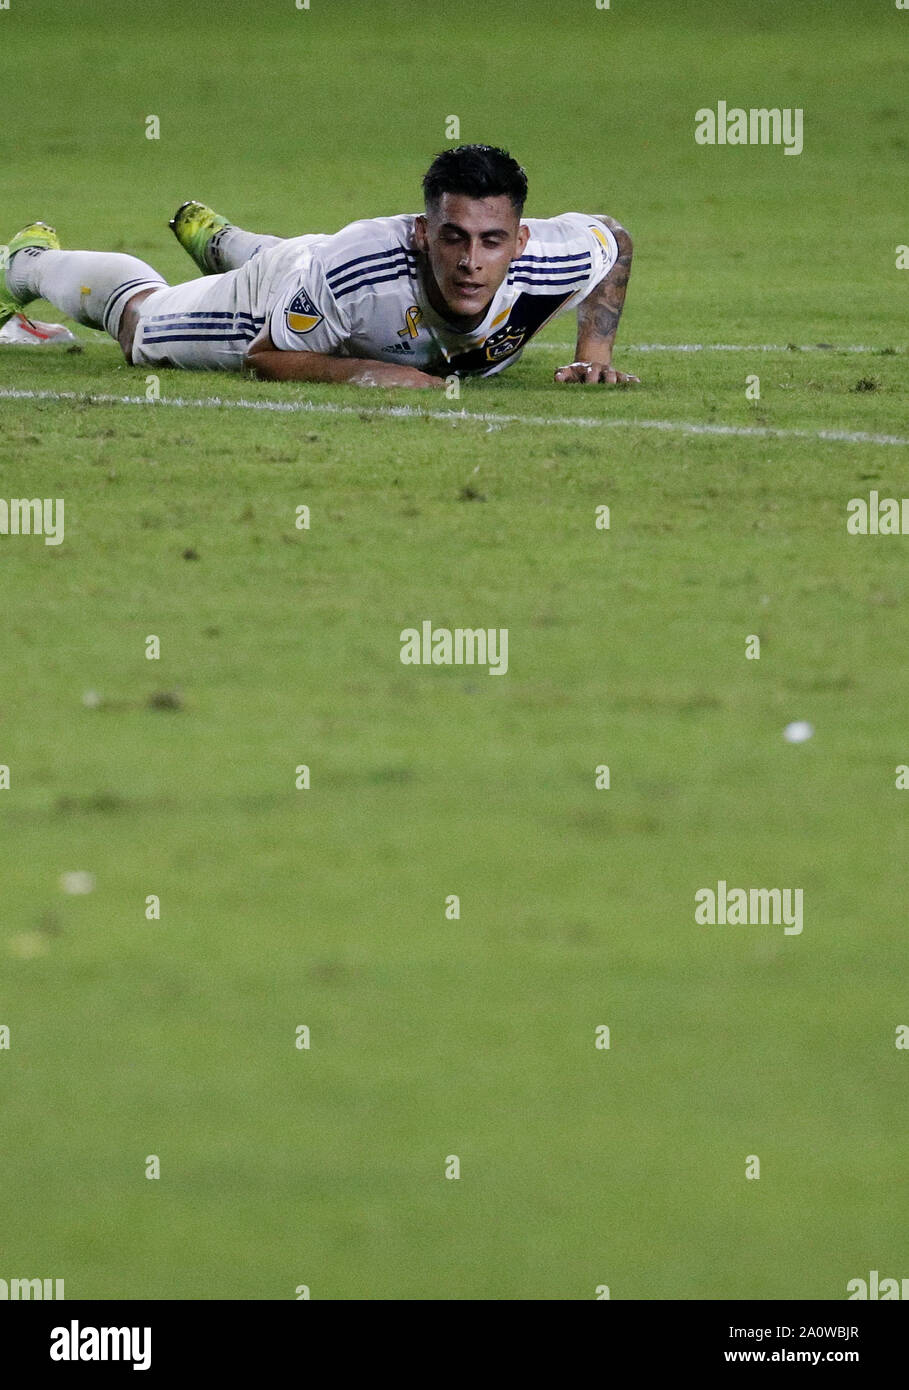 Los Angeles, California, USA. 21st Sep, 2019. LA Galaxy forward Cristian Pavon (10) reacts during the 2019 Major League Soccer (MLS) match between LA Galaxy and Montreal Impact in Carson, California, September 21, 2019. Credit: Ringo Chiu/ZUMA Wire/Alamy Live News Stock Photo